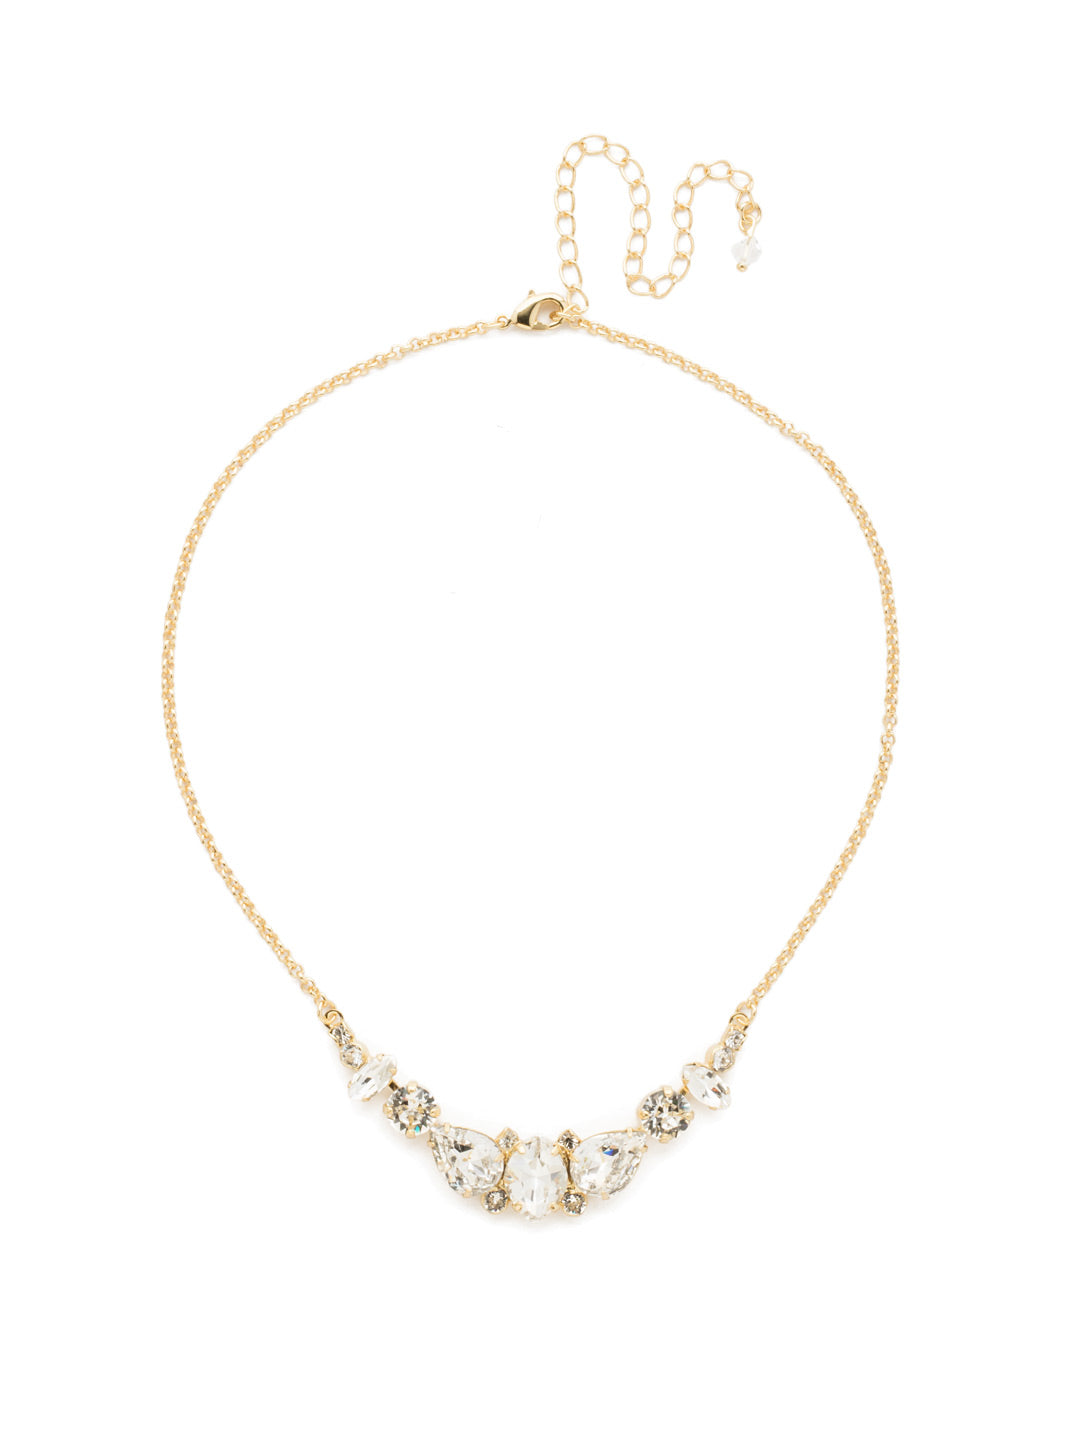 Crysanthemum Statement Necklace - NDN4BGCRY - <p>A sweet, petite style whose whimsical design adds just the right amount of flair to any look. From Sorrelli's Crystal collection in our Bright Gold-tone finish.</p>